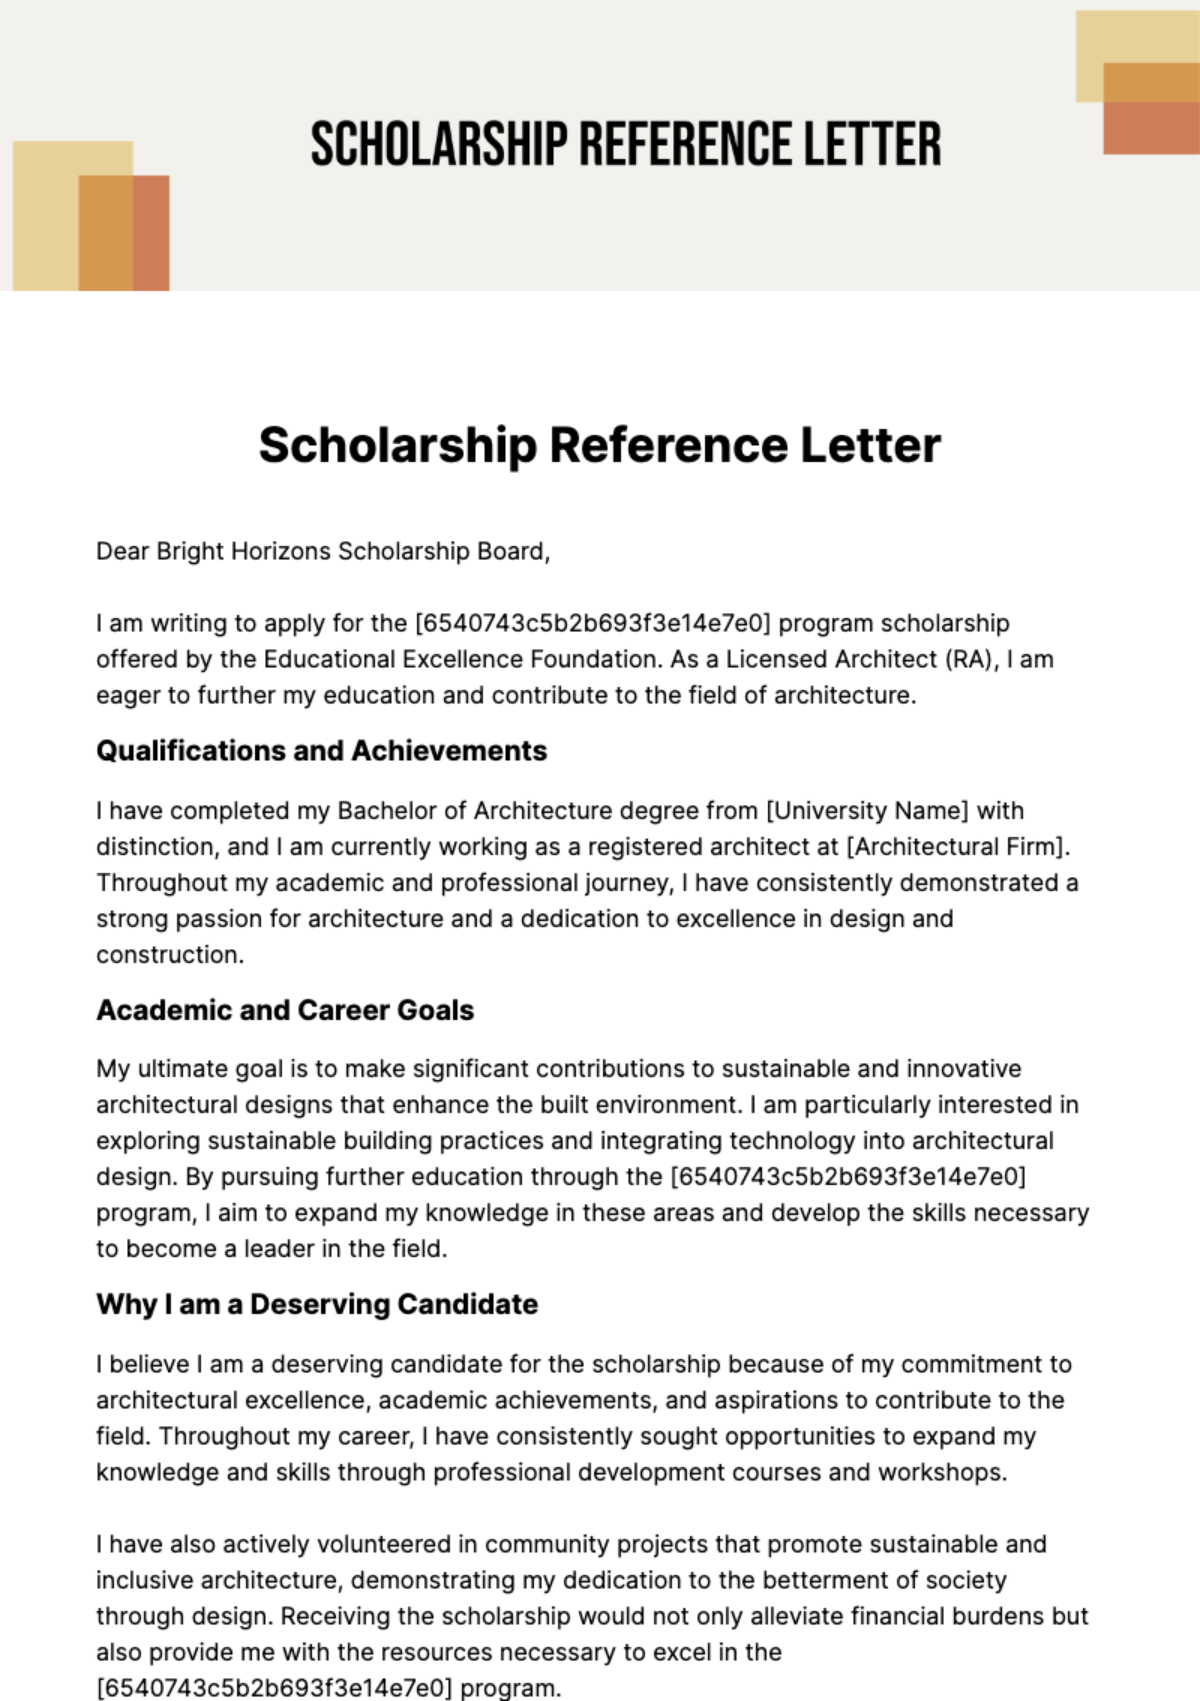 Free Scholarship Reference Letter Template